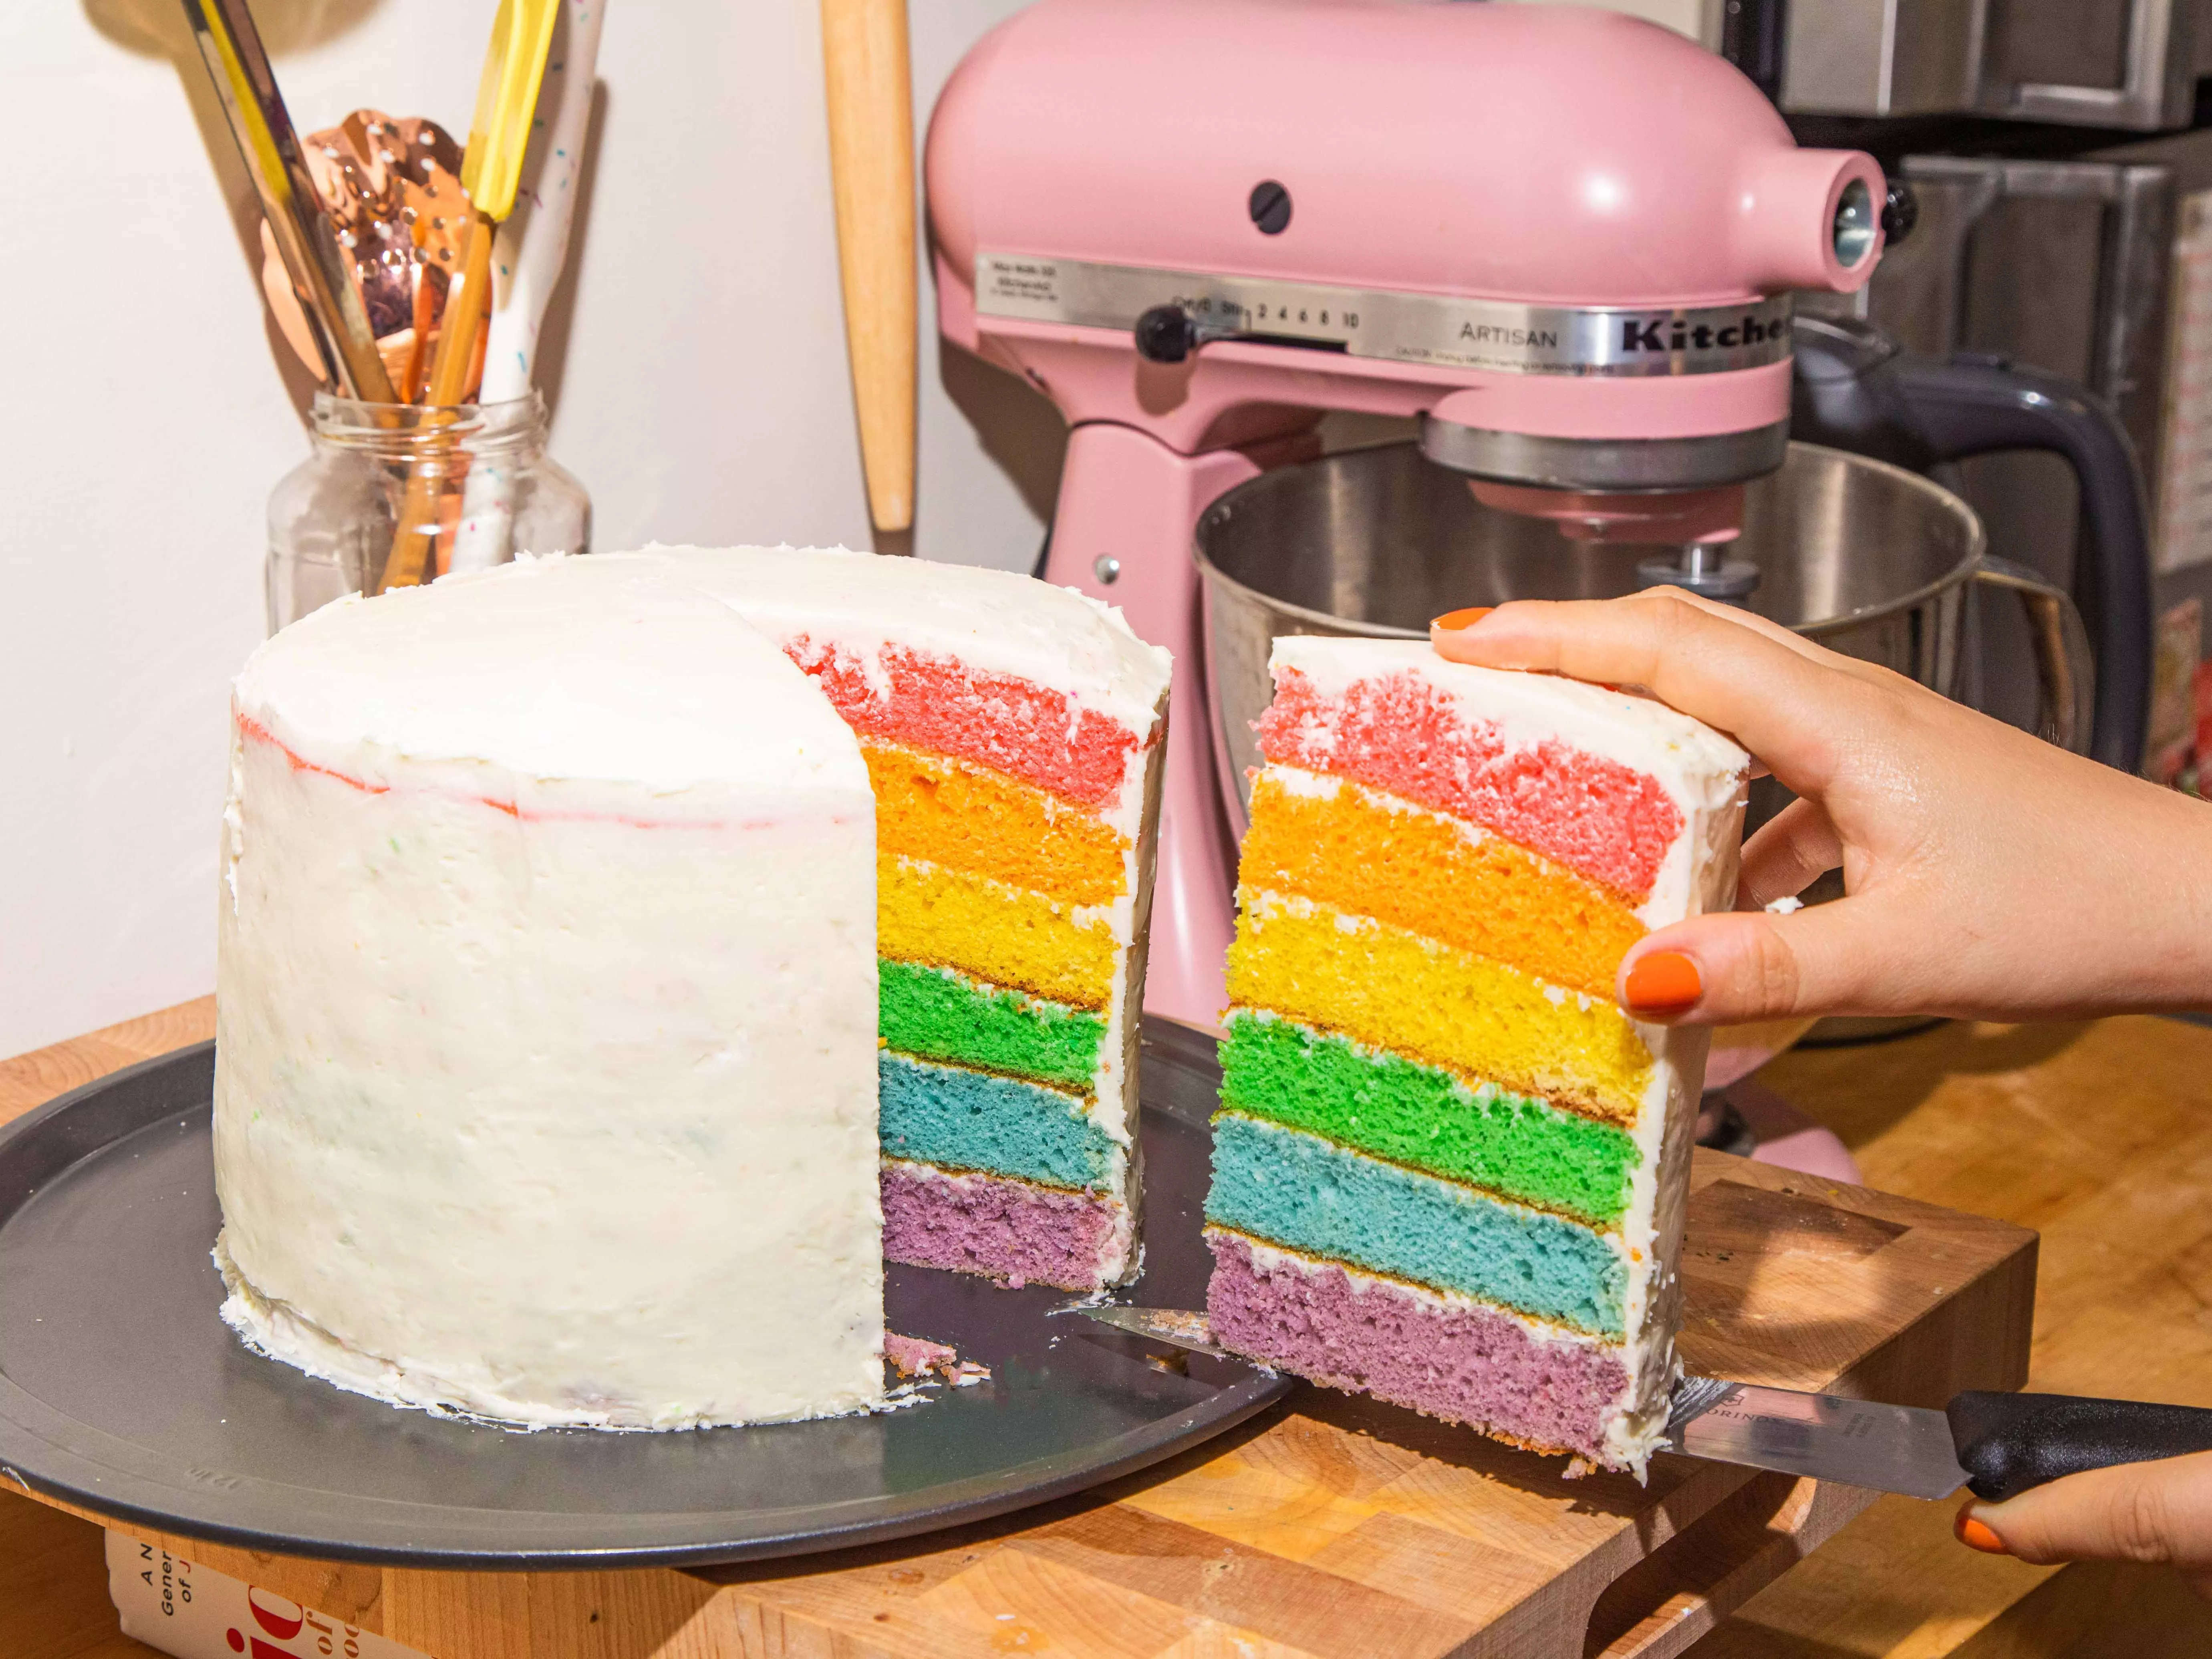 A hand holding a slice of a six layer rainbow cake with the full cake behind it